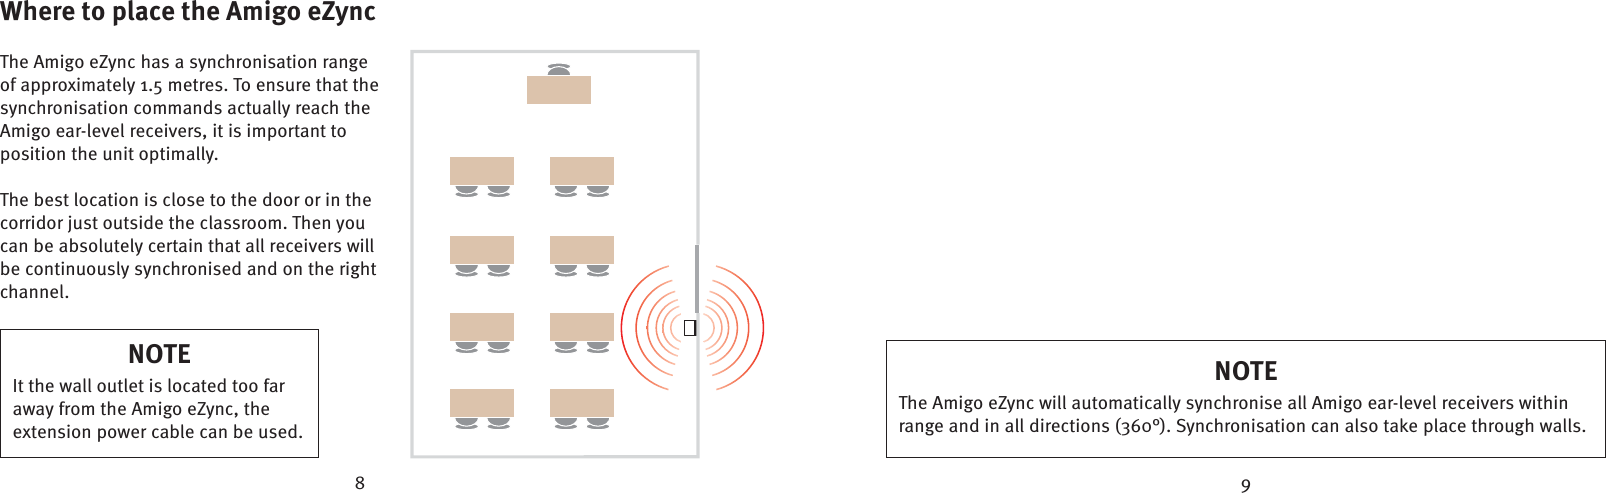 8 9Where to place the Amigo eZyncThe Amigo eZync has a synchronisation range of approximately 1.5 metres. To ensure that the synchronisation commands actually reach the Amigo ear-level receivers, it is important to position the unit optimally.The best location is close to the door or in the corridor just outside the classroom. Then you can be absolutely certain that all receivers will be continuously synchronised and on the right channel.NOTEThe Amigo eZync will automatically synchronise all Amigo ear-level receivers within range and in all directions (360°). Synchronisation can also take place through walls.NOTEIt the wall outlet is located too far away from the Amigo eZync, the extension power cable can be used. 